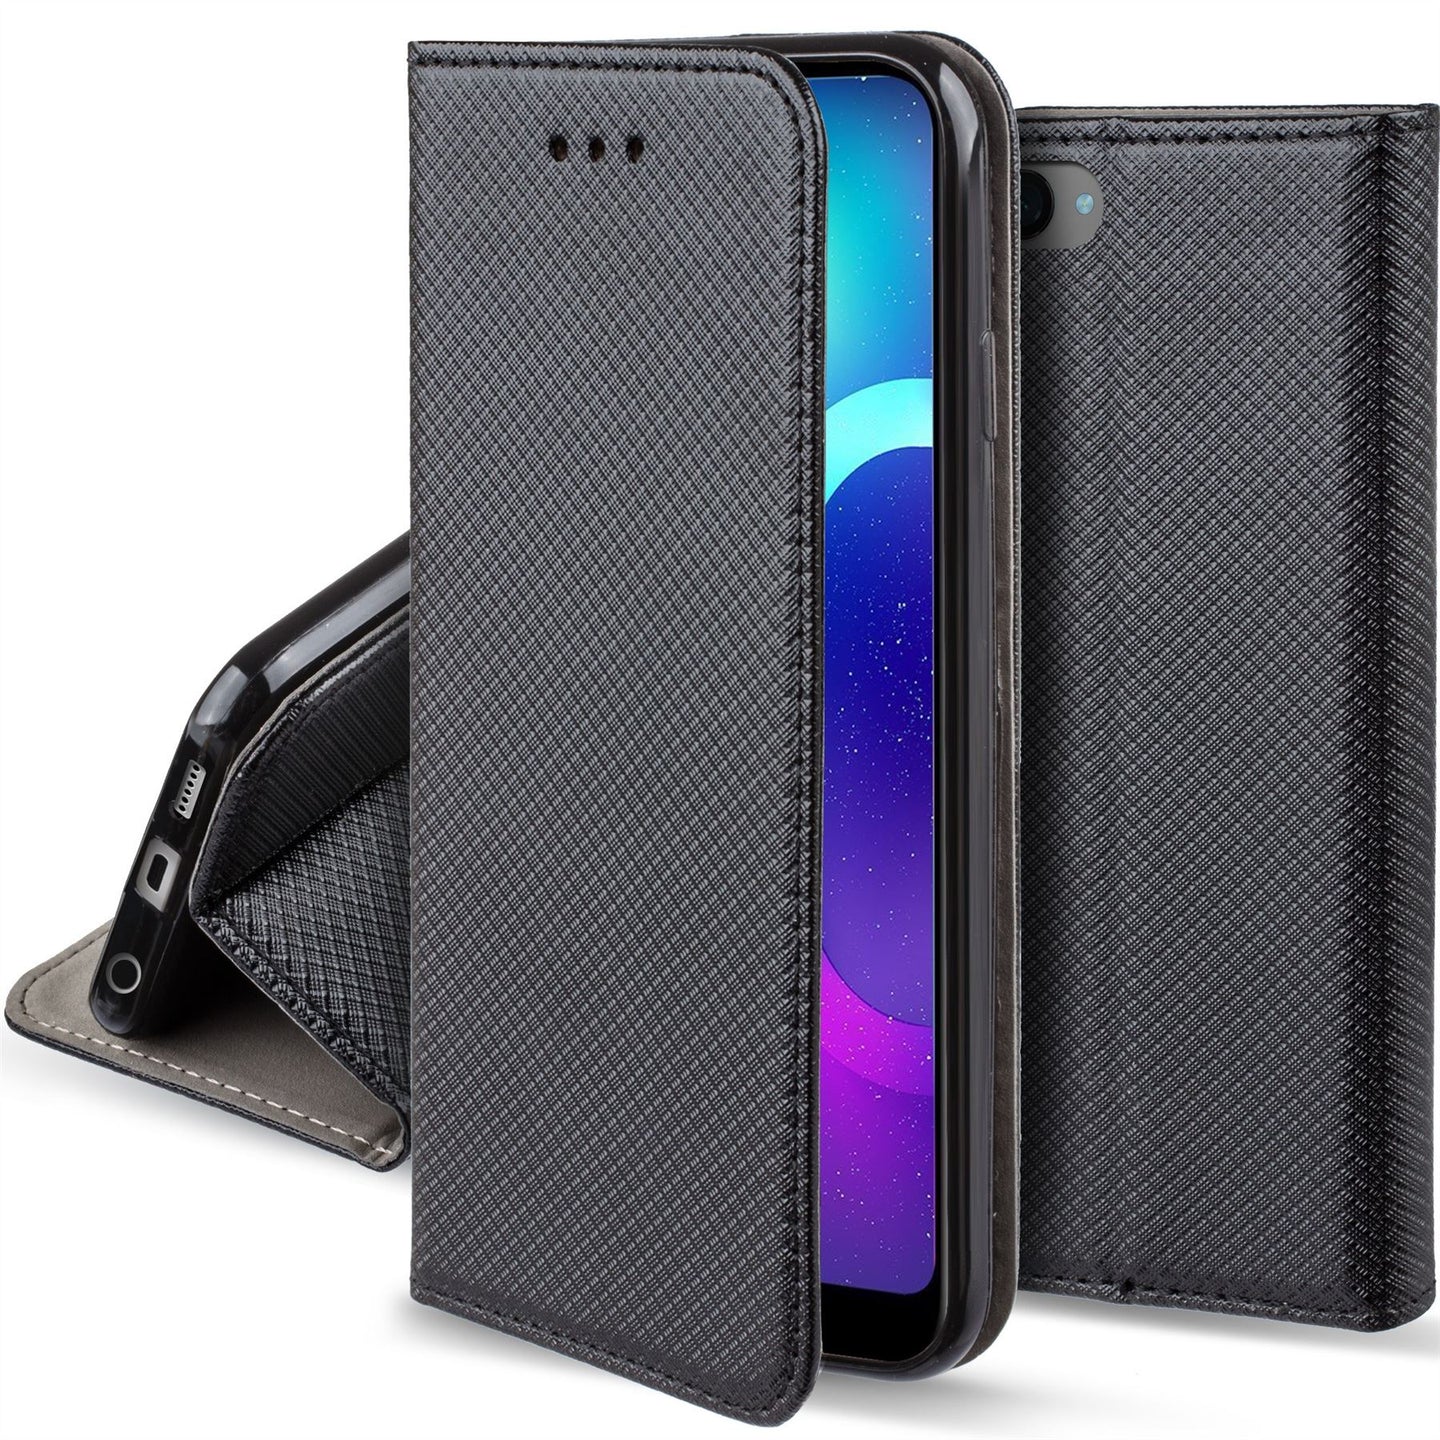 Moozy Case Flip Cover for Huawei Honor 10, Black - Smart Magnetic Flip Case with Card Holder and Stand